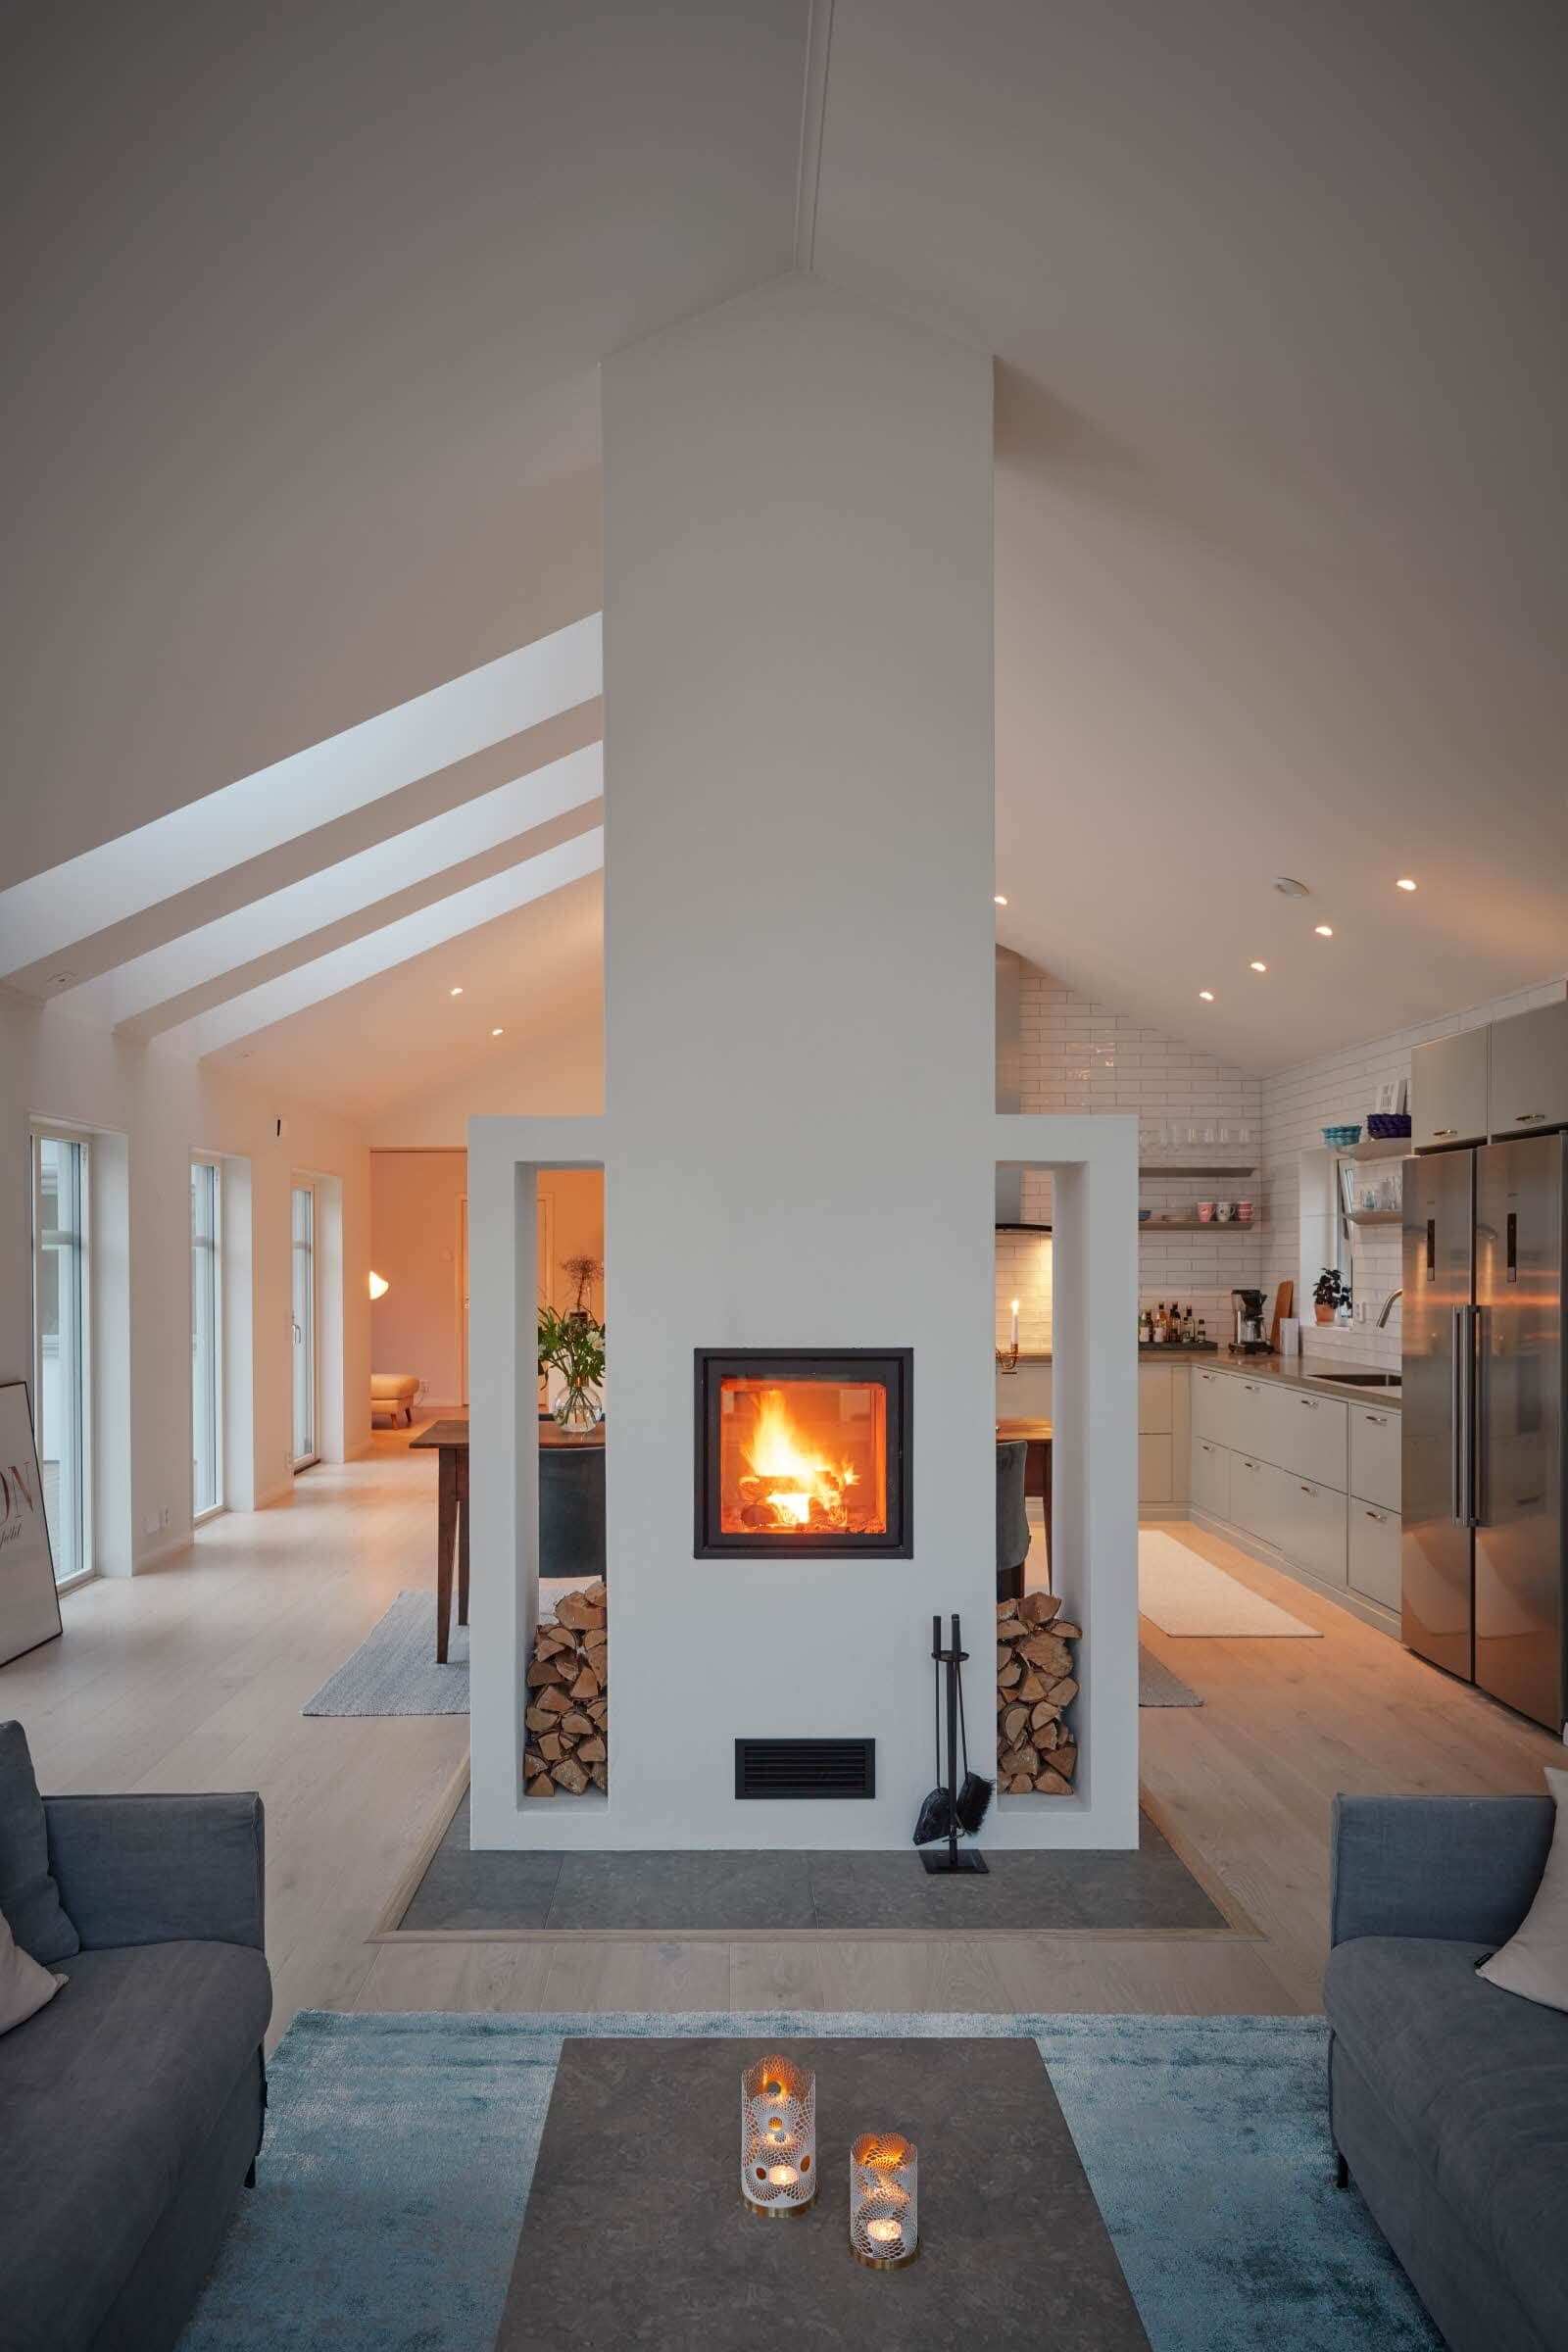 Hotels with Fireplaces New 16 Gorgeous Double Sided Fireplace Design Ideas Take A Look